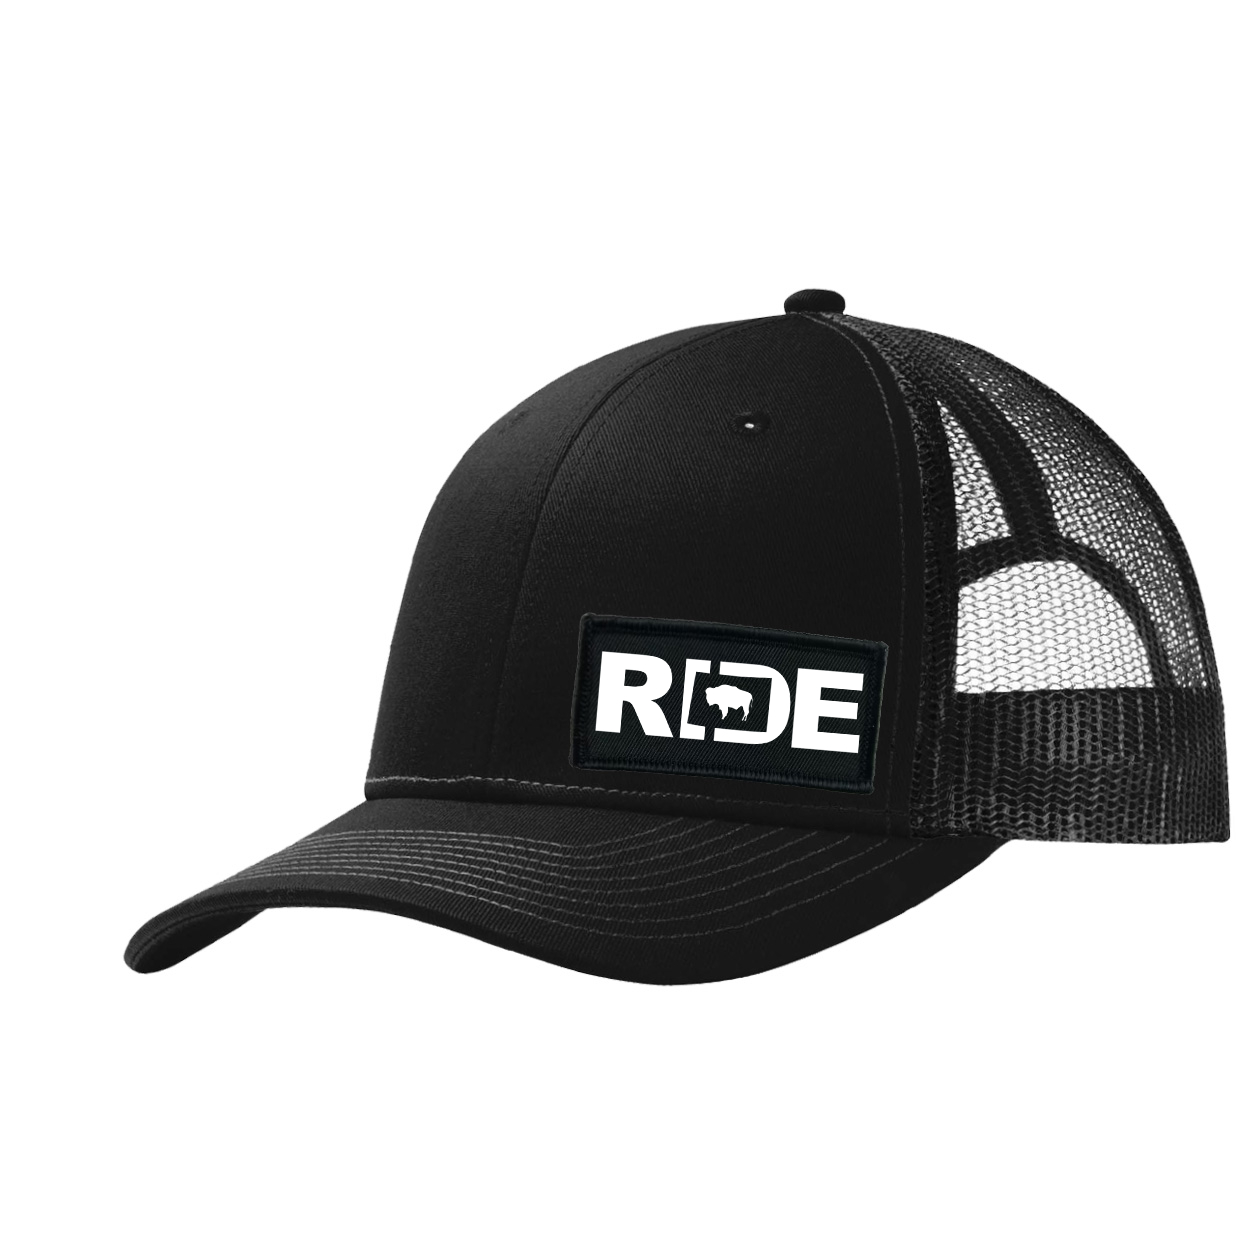 Ride Wyoming Night Out Woven Patch Snapback Trucker Hat Black (White Logo)